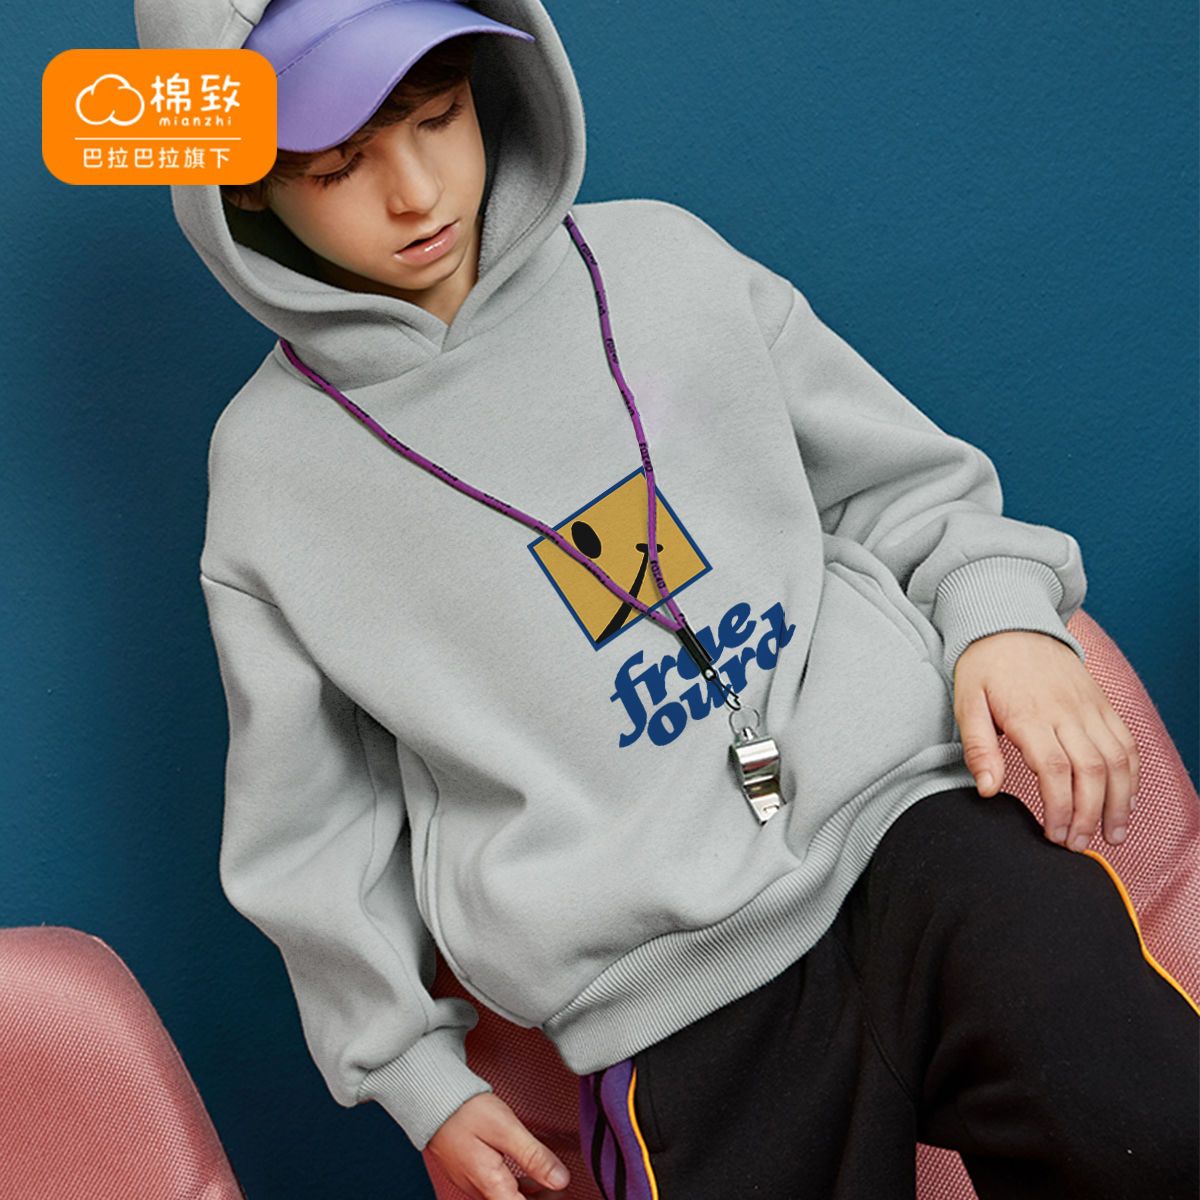 Semir Group's Cotton Children's Wear Winter Clothes Boys Hooded Thickened Plush Sweatshirt Year of the Tiger New Year's Greeting Clothes